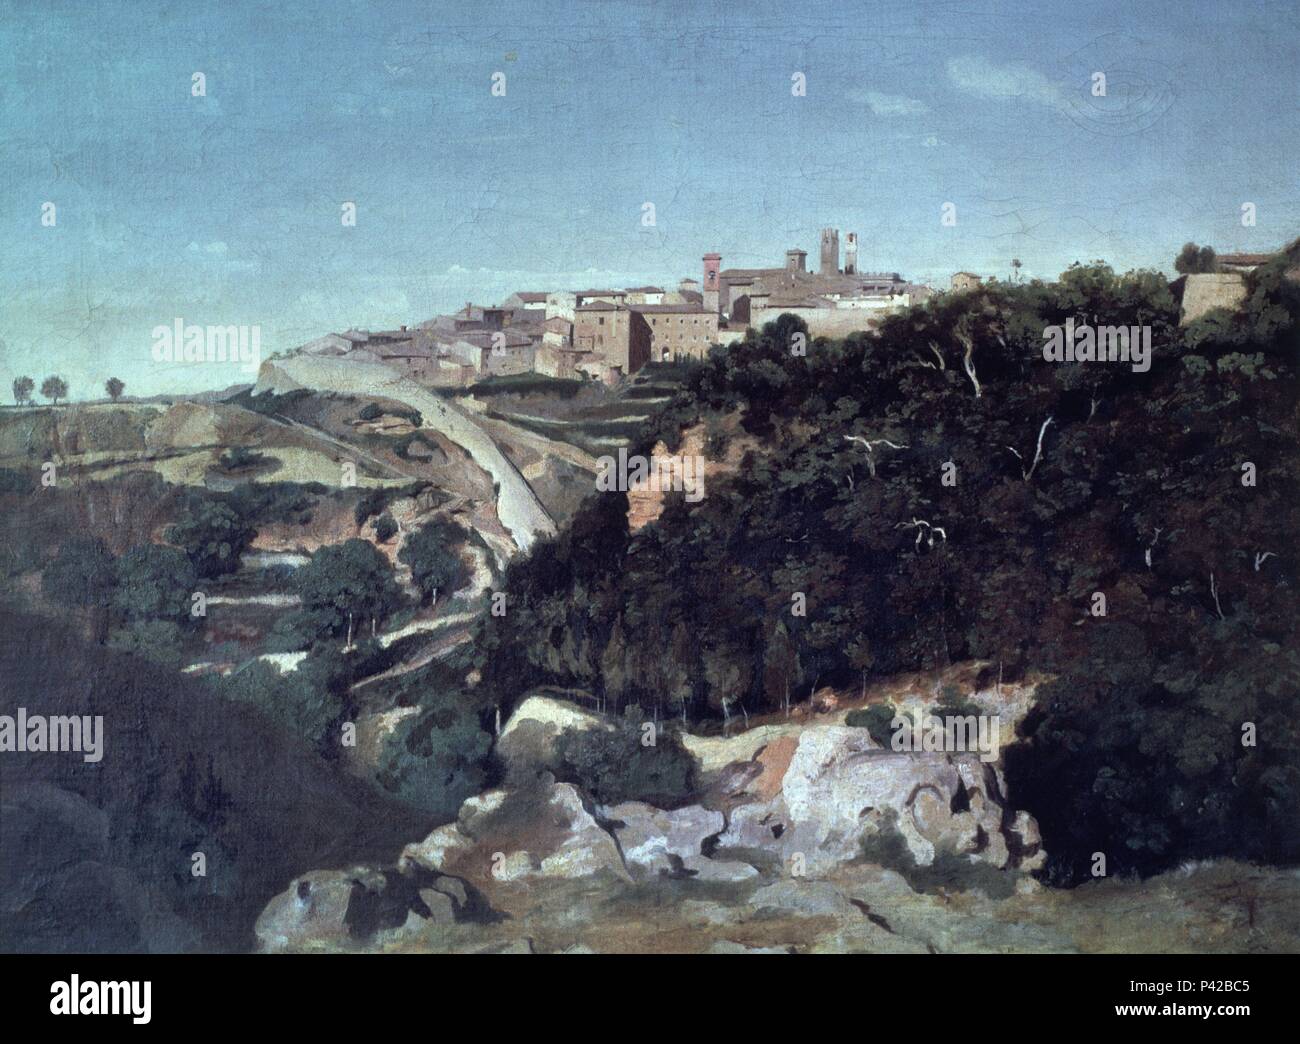 Volterra - 1834 - 70,5x94 cm - oil on canvas. Author: Jean Baptiste Camille Corot (1796-1875). Location: LOUVRE MUSEUM-PAINTINGS. Also known as: VOLTERRA. Stock Photo